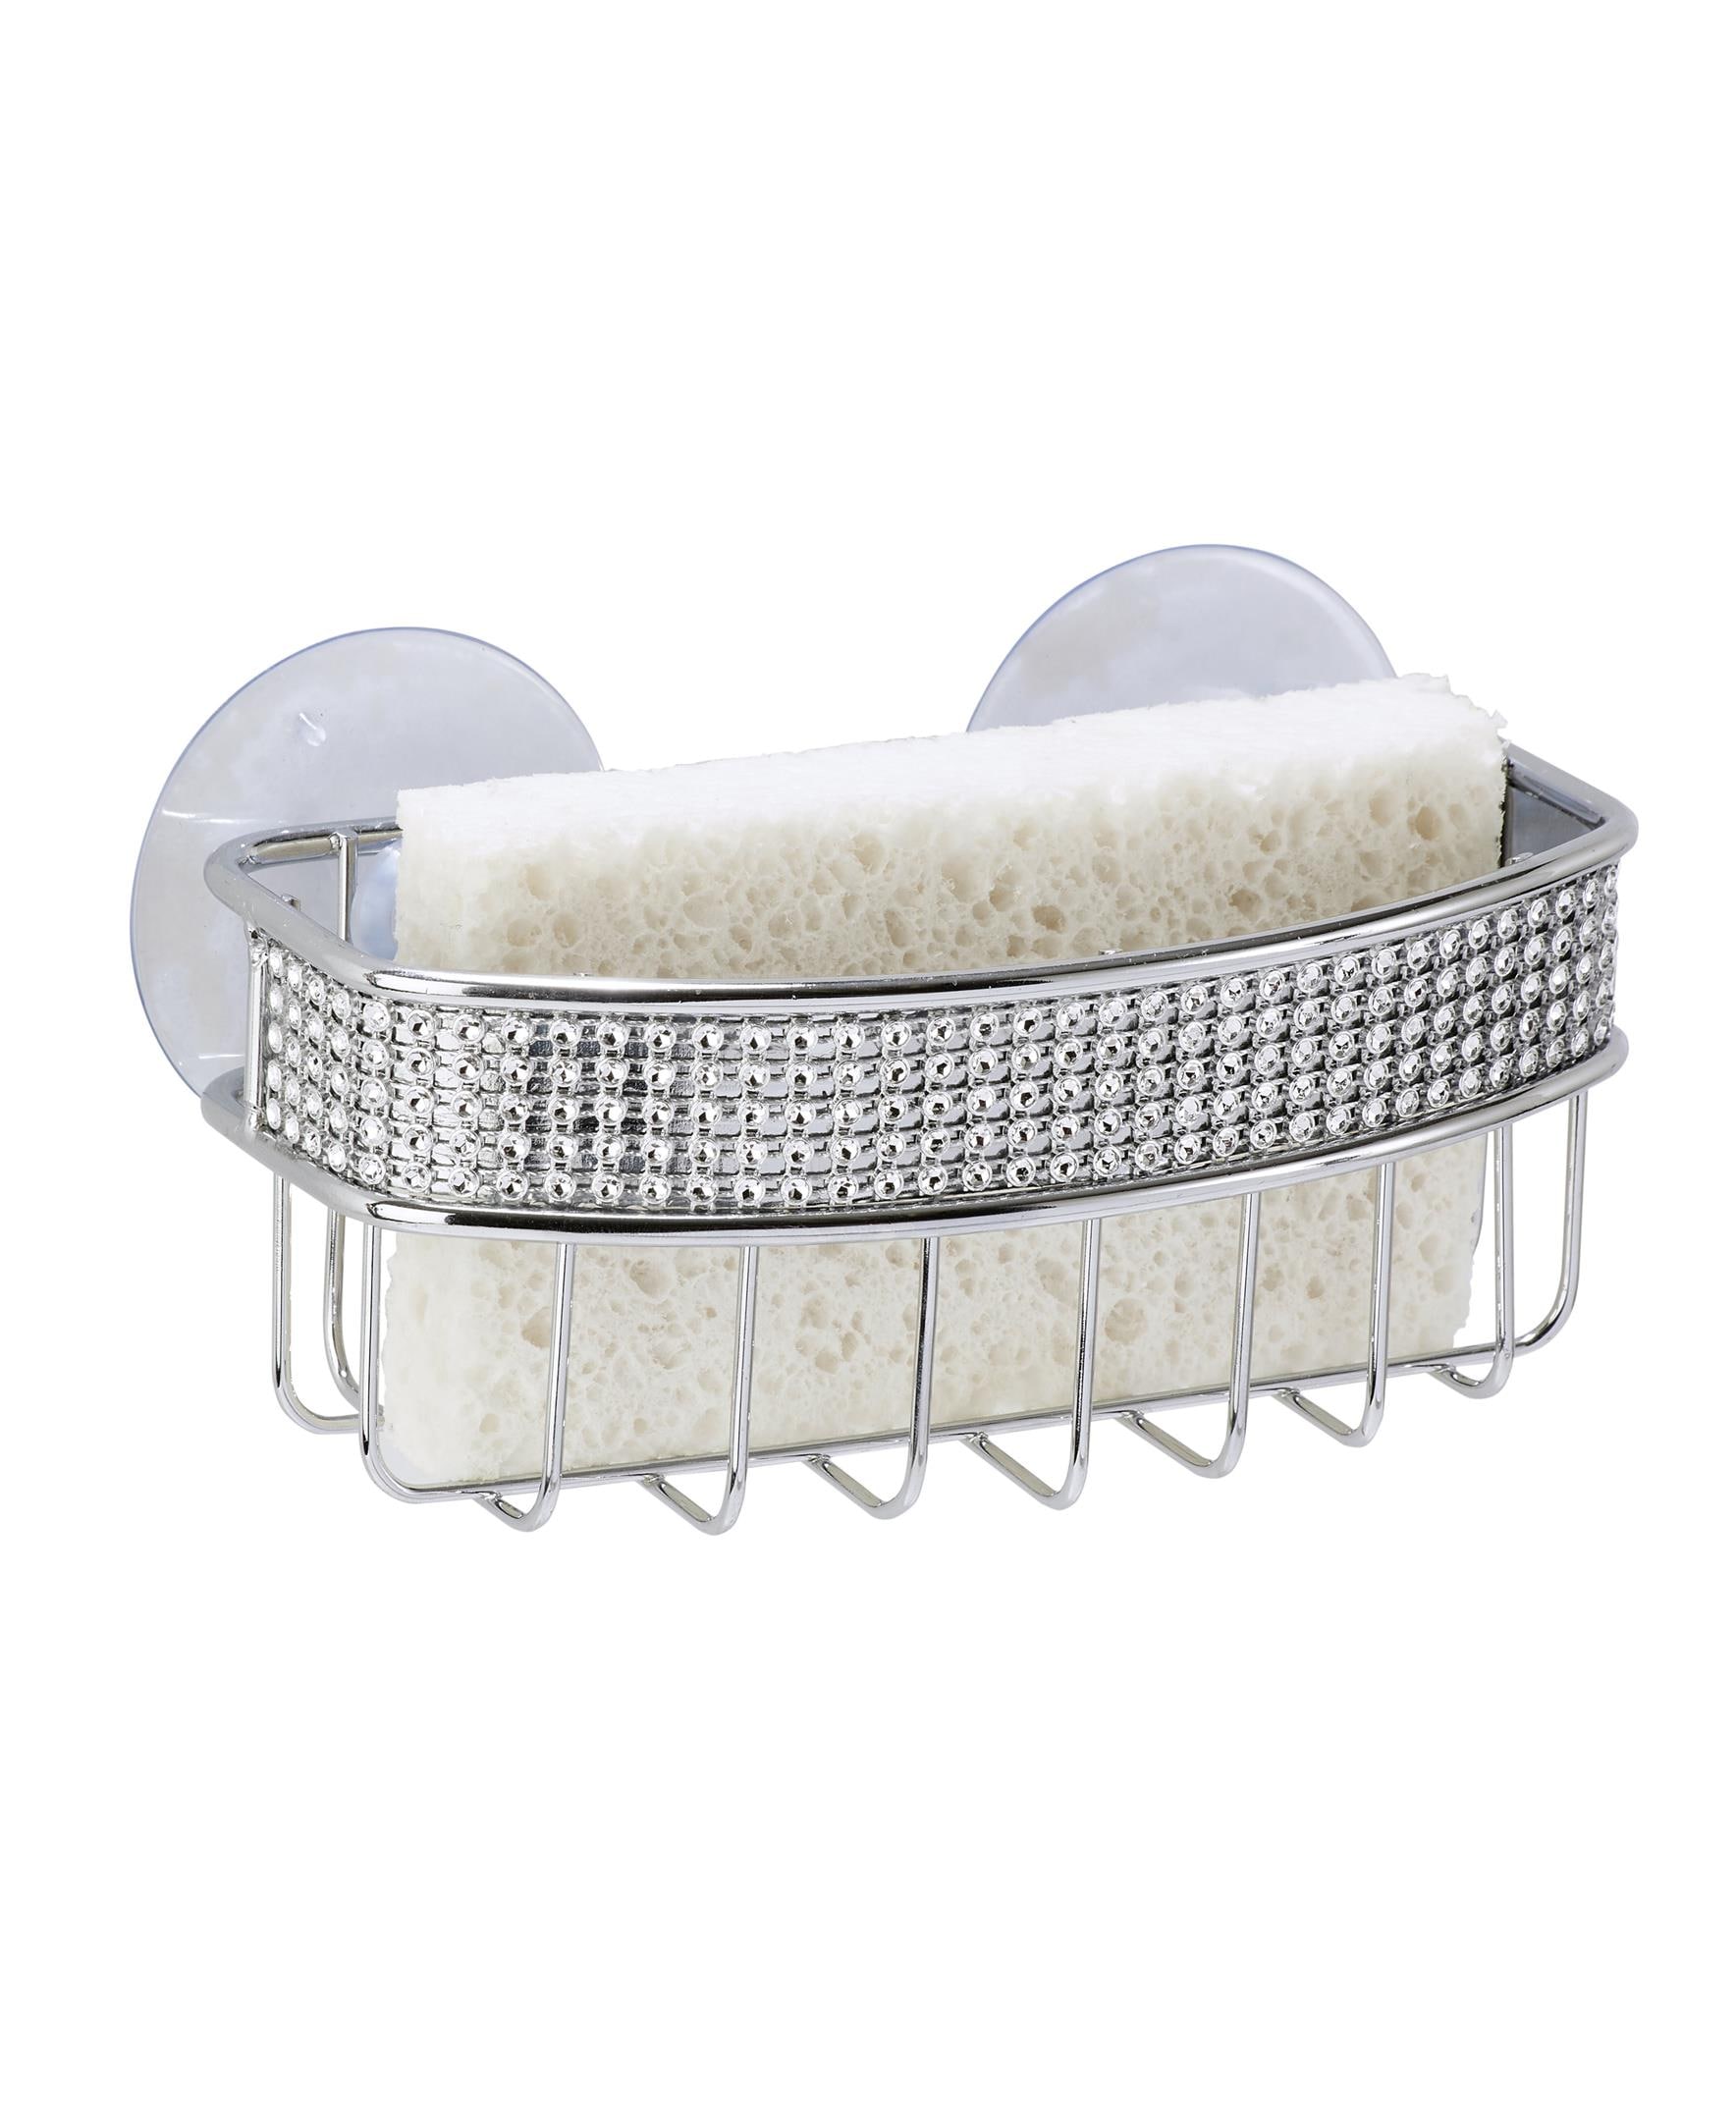 Kitchen Details Double Sink Sponge Holder in White - Metal Hanging Sink  Caddy - 7x5x5 inches - Open Wire Design - Water Drainage - Perfect for  Sponges in the Sink Caddies department at